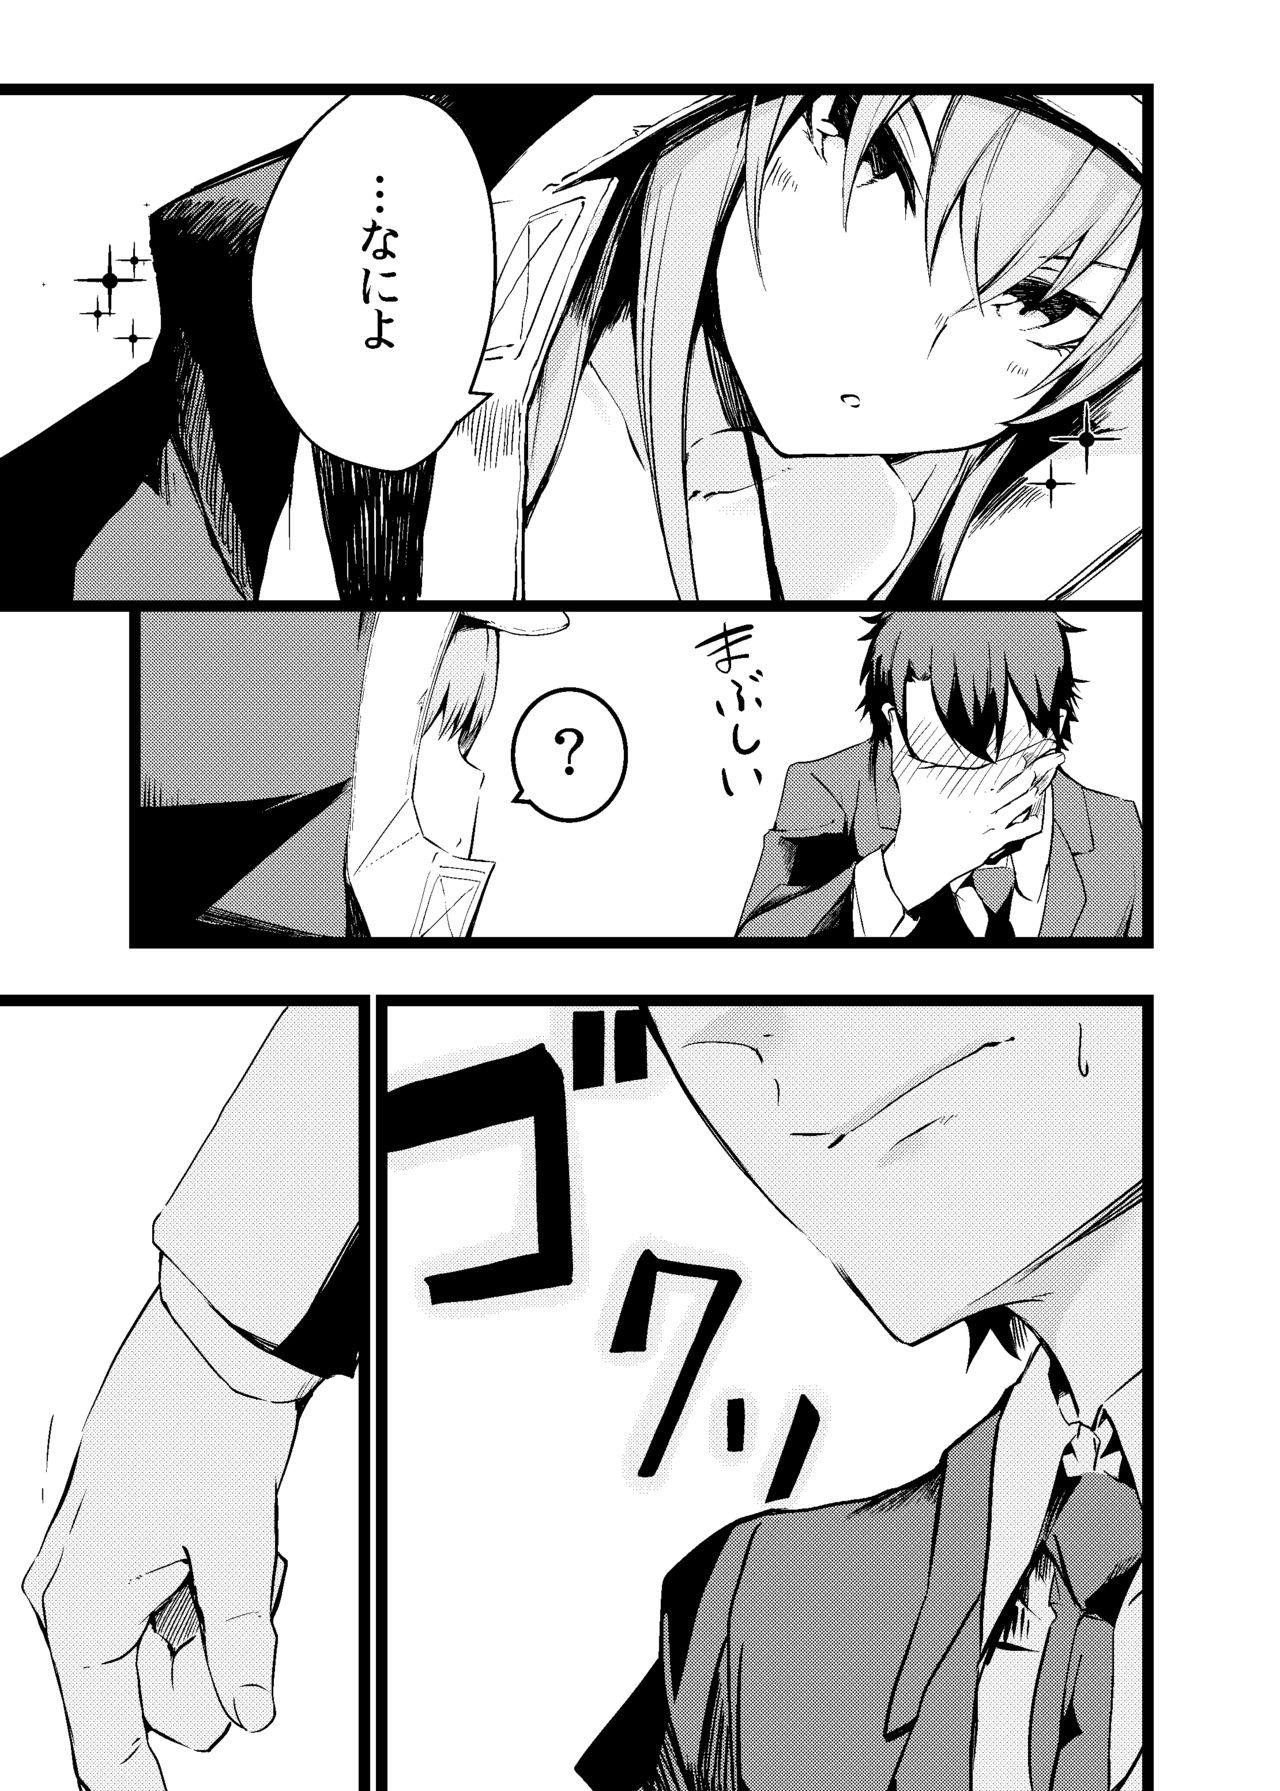 Deepthroat Mizugi na Meltlilith-san to - Fate grand order Submission - Page 6